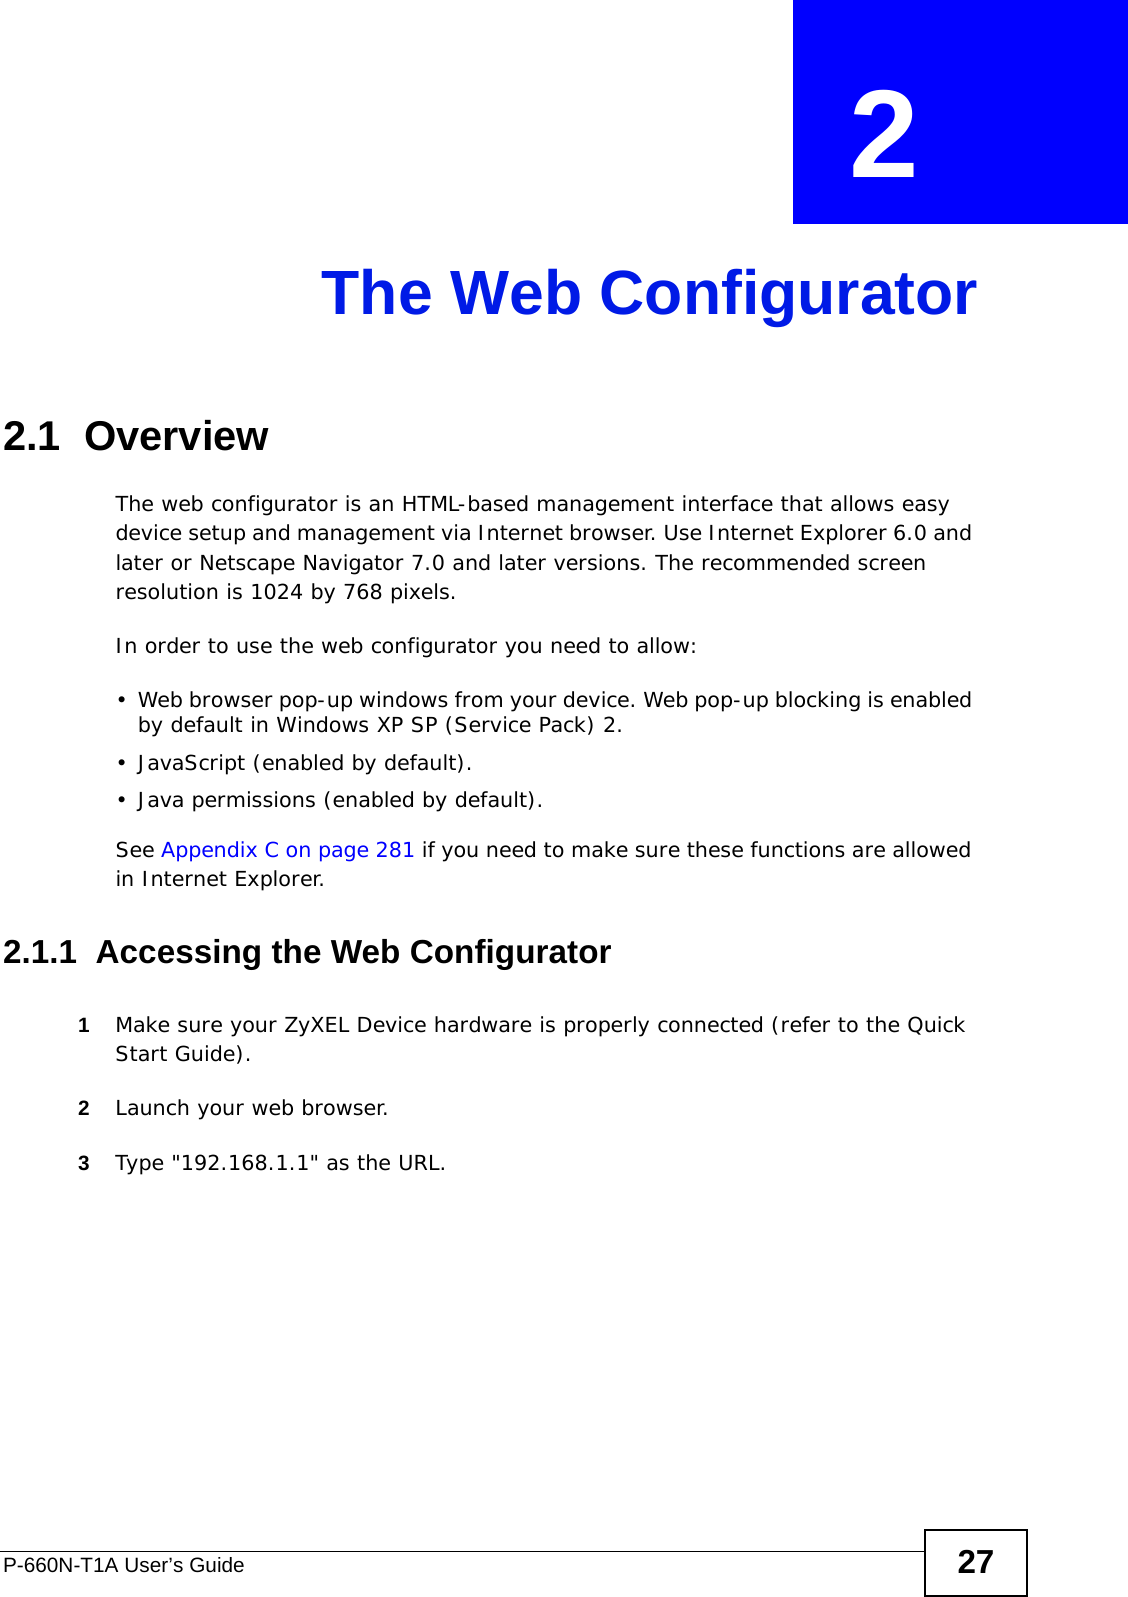 P-660N-T1A User’s Guide 27CHAPTER  2 The Web Configurator2.1  OverviewThe web configurator is an HTML-based management interface that allows easy device setup and management via Internet browser. Use Internet Explorer 6.0 and later or Netscape Navigator 7.0 and later versions. The recommended screen resolution is 1024 by 768 pixels.In order to use the web configurator you need to allow:• Web browser pop-up windows from your device. Web pop-up blocking is enabled by default in Windows XP SP (Service Pack) 2.• JavaScript (enabled by default).• Java permissions (enabled by default).See Appendix C on page 281 if you need to make sure these functions are allowed in Internet Explorer.2.1.1  Accessing the Web Configurator1Make sure your ZyXEL Device hardware is properly connected (refer to the Quick Start Guide).2Launch your web browser.3Type &quot;192.168.1.1&quot; as the URL.